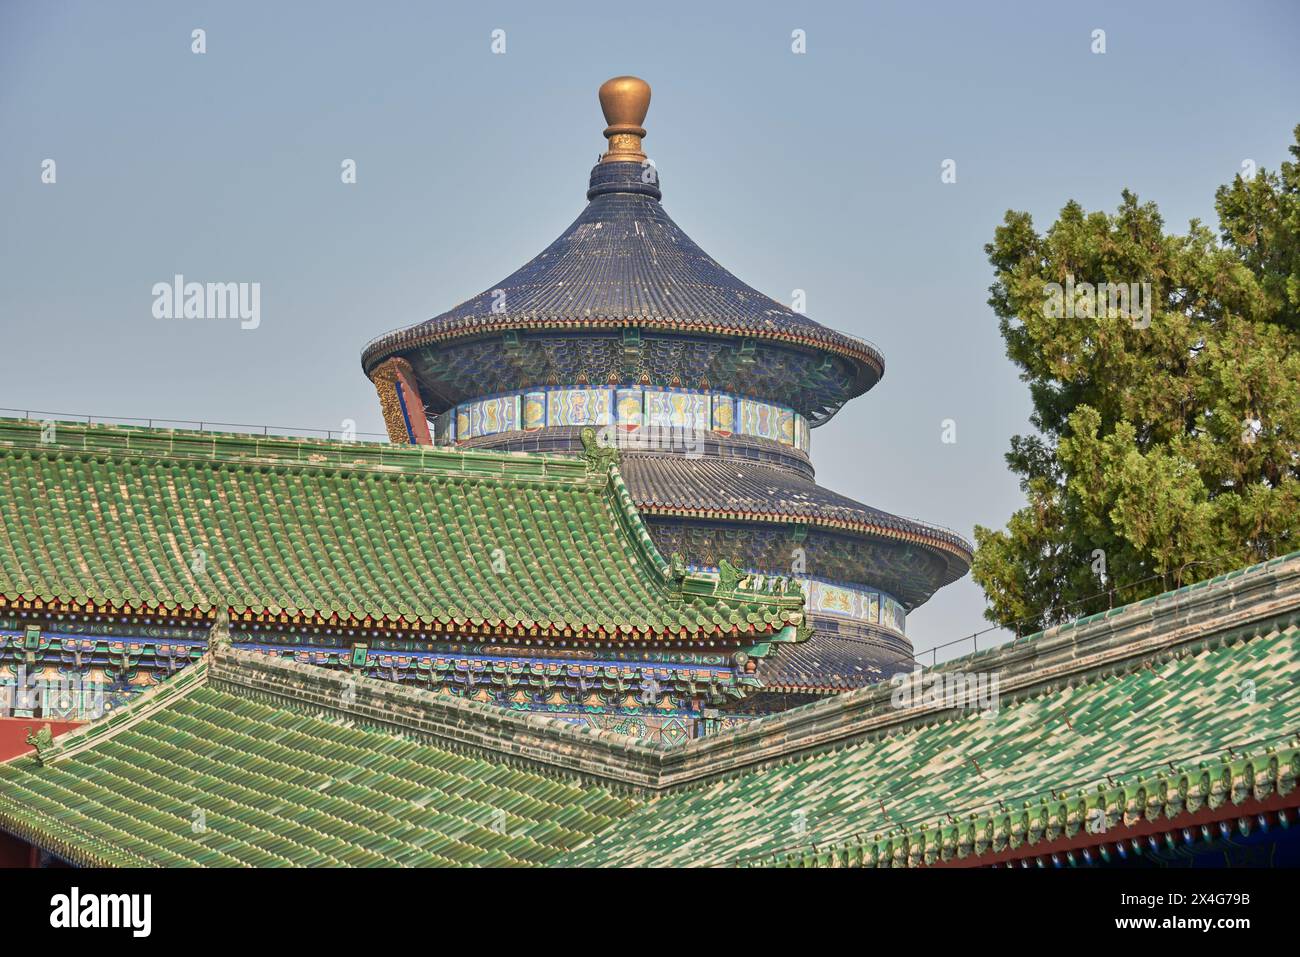 Tourist landmarks of Temple of Heaven, where emperors of the Ming and Qing dynasties prayed to Heaven for good harvest, in Beijing, China on Stock Photo